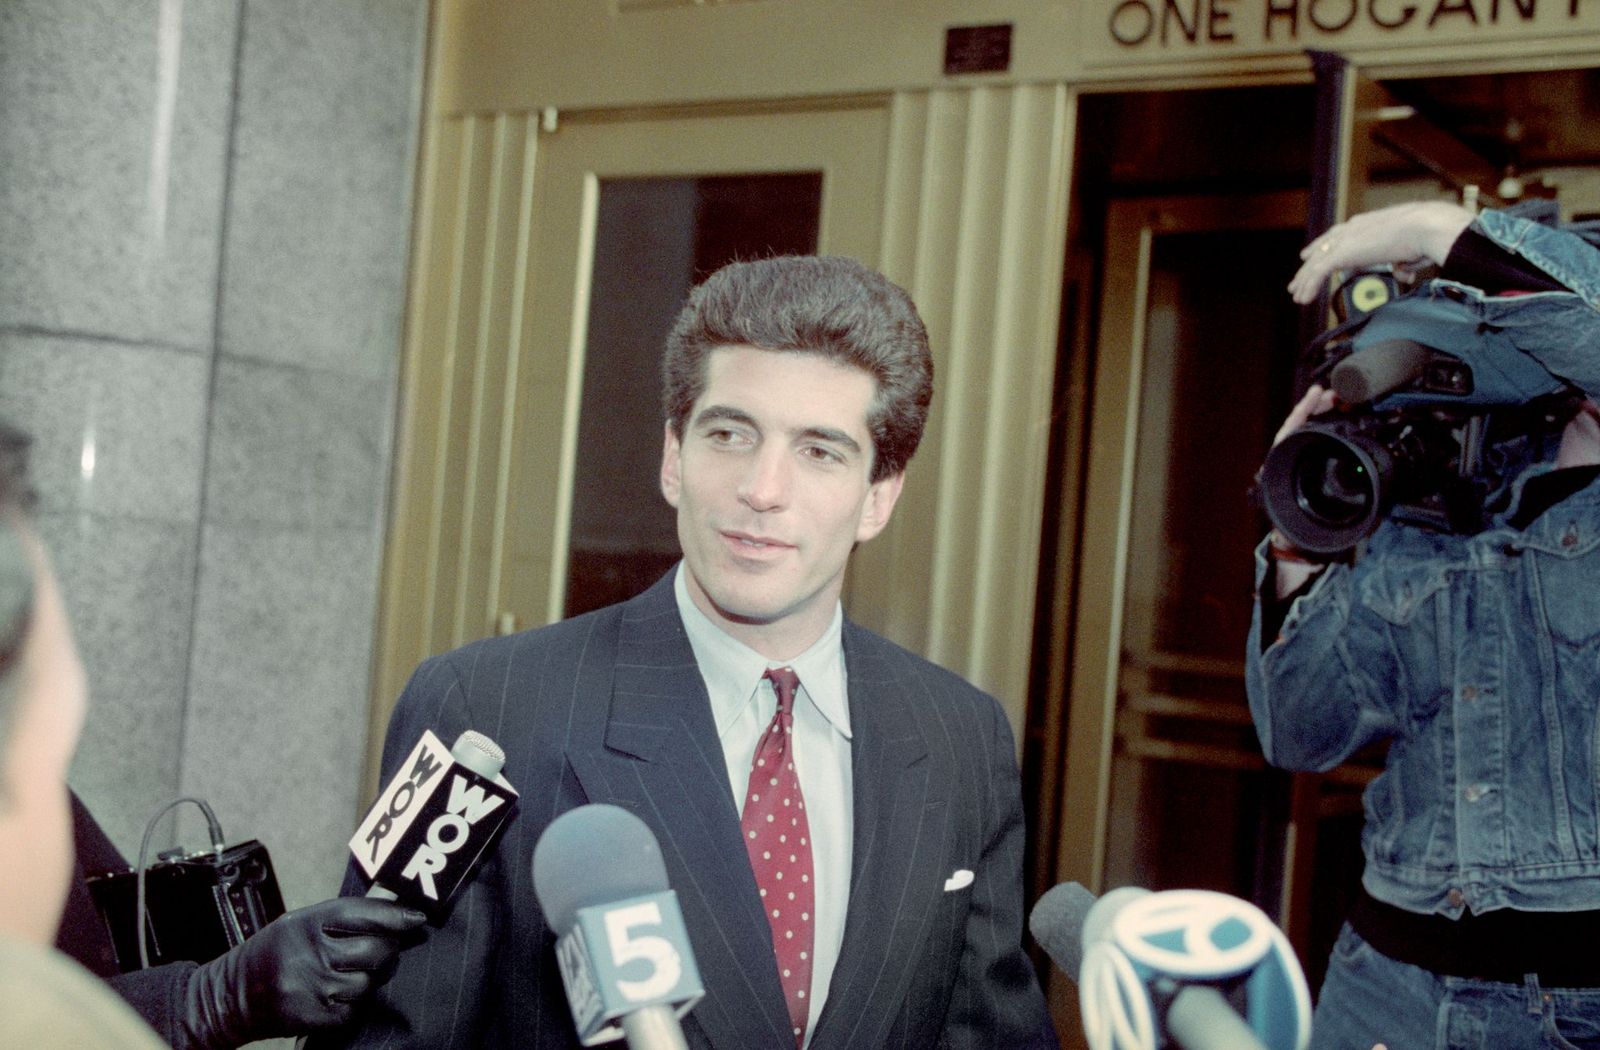 John F. Kennedy Jr., son of the assassinated president, talked to reporters about passing the New York Bar examination. He is a prosecutor at the Manhattan district attorney's office on November 07, 1990 | Photo: Getty Images